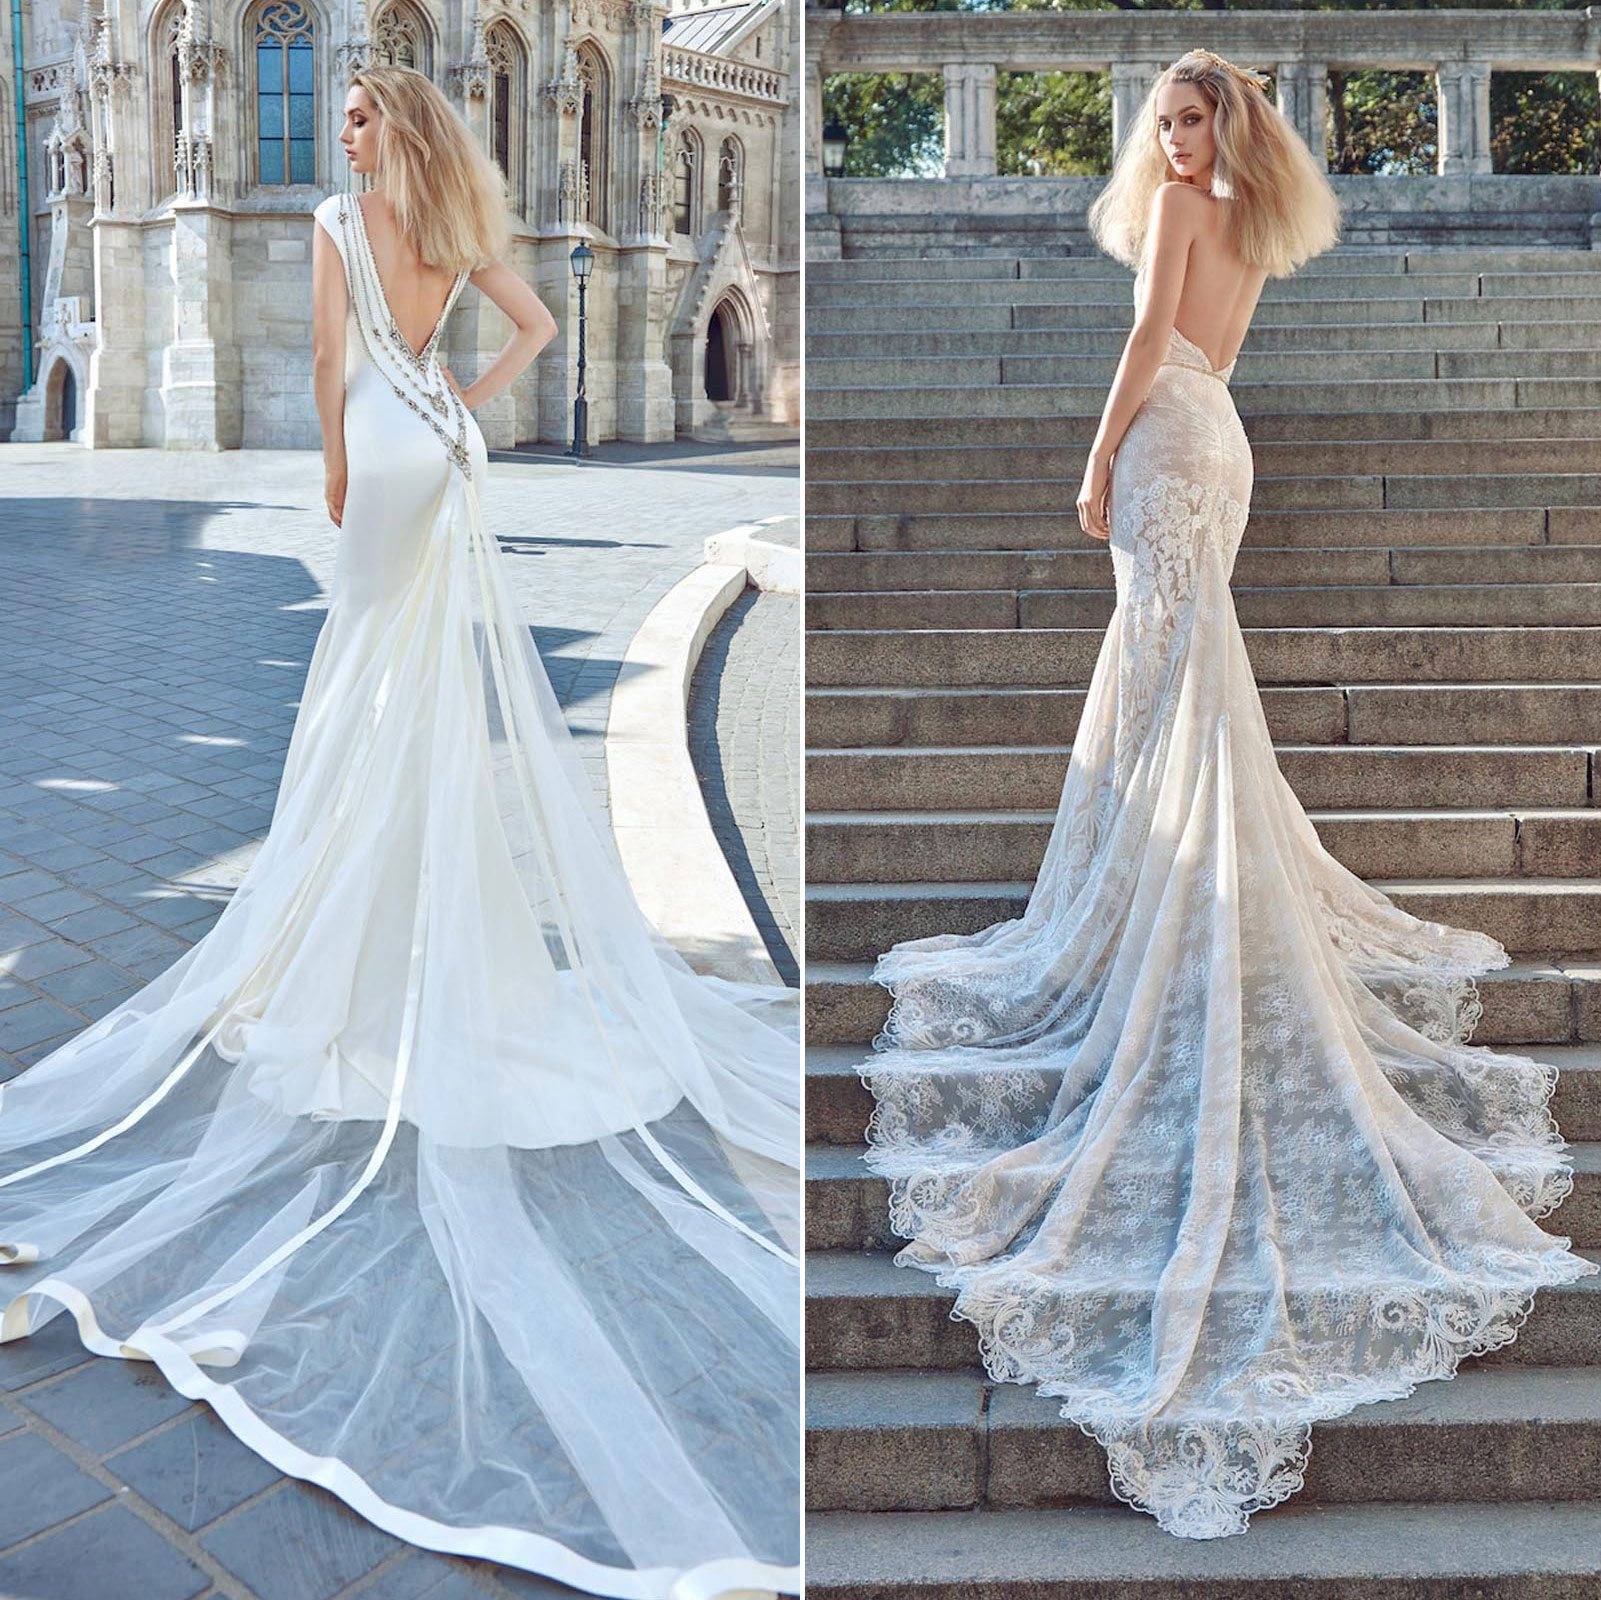 Ivory Tower: The thrilling fall 2016 haute couture collection by Galia Lahav